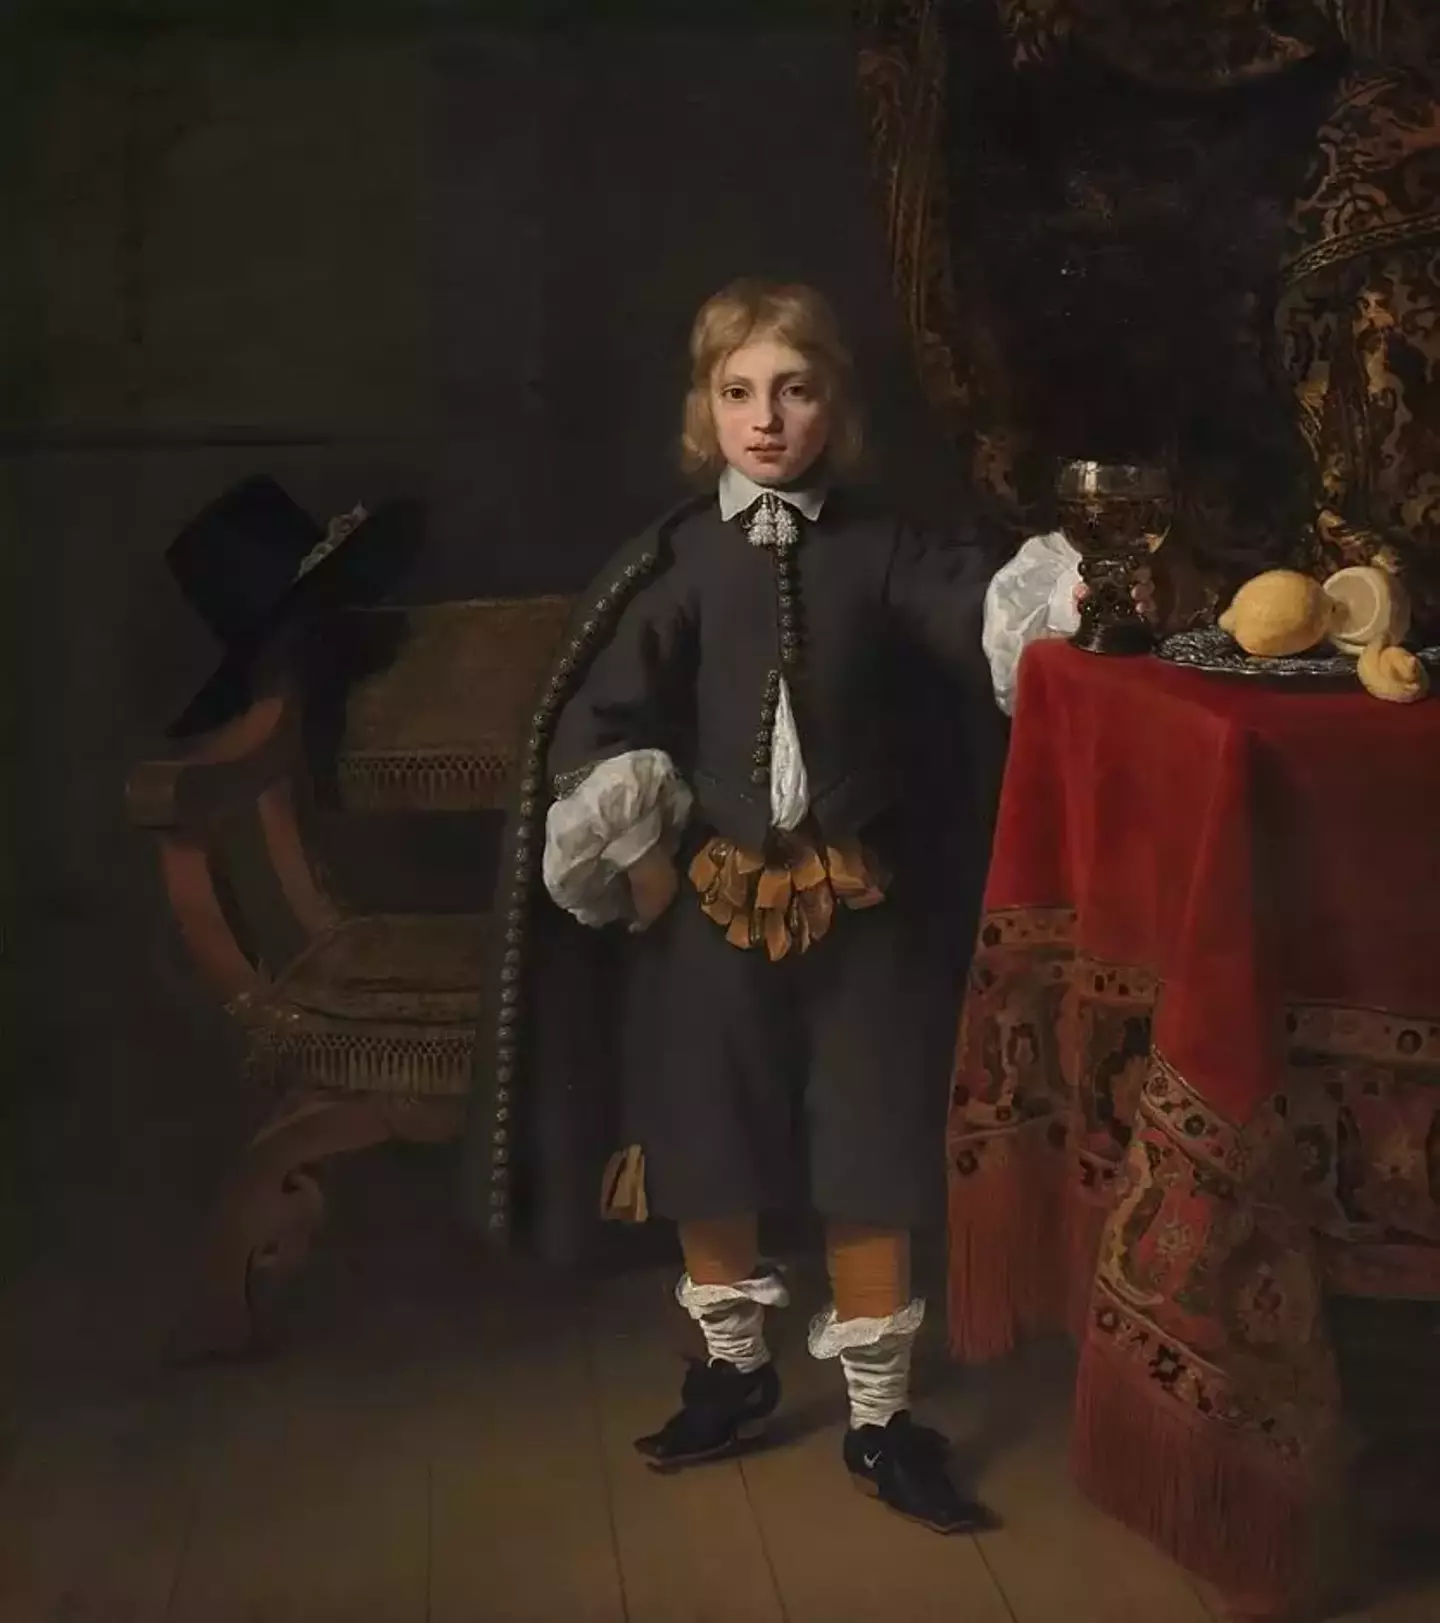 People are convinced the 400-year-old portrait features a pair of Nike trainers.